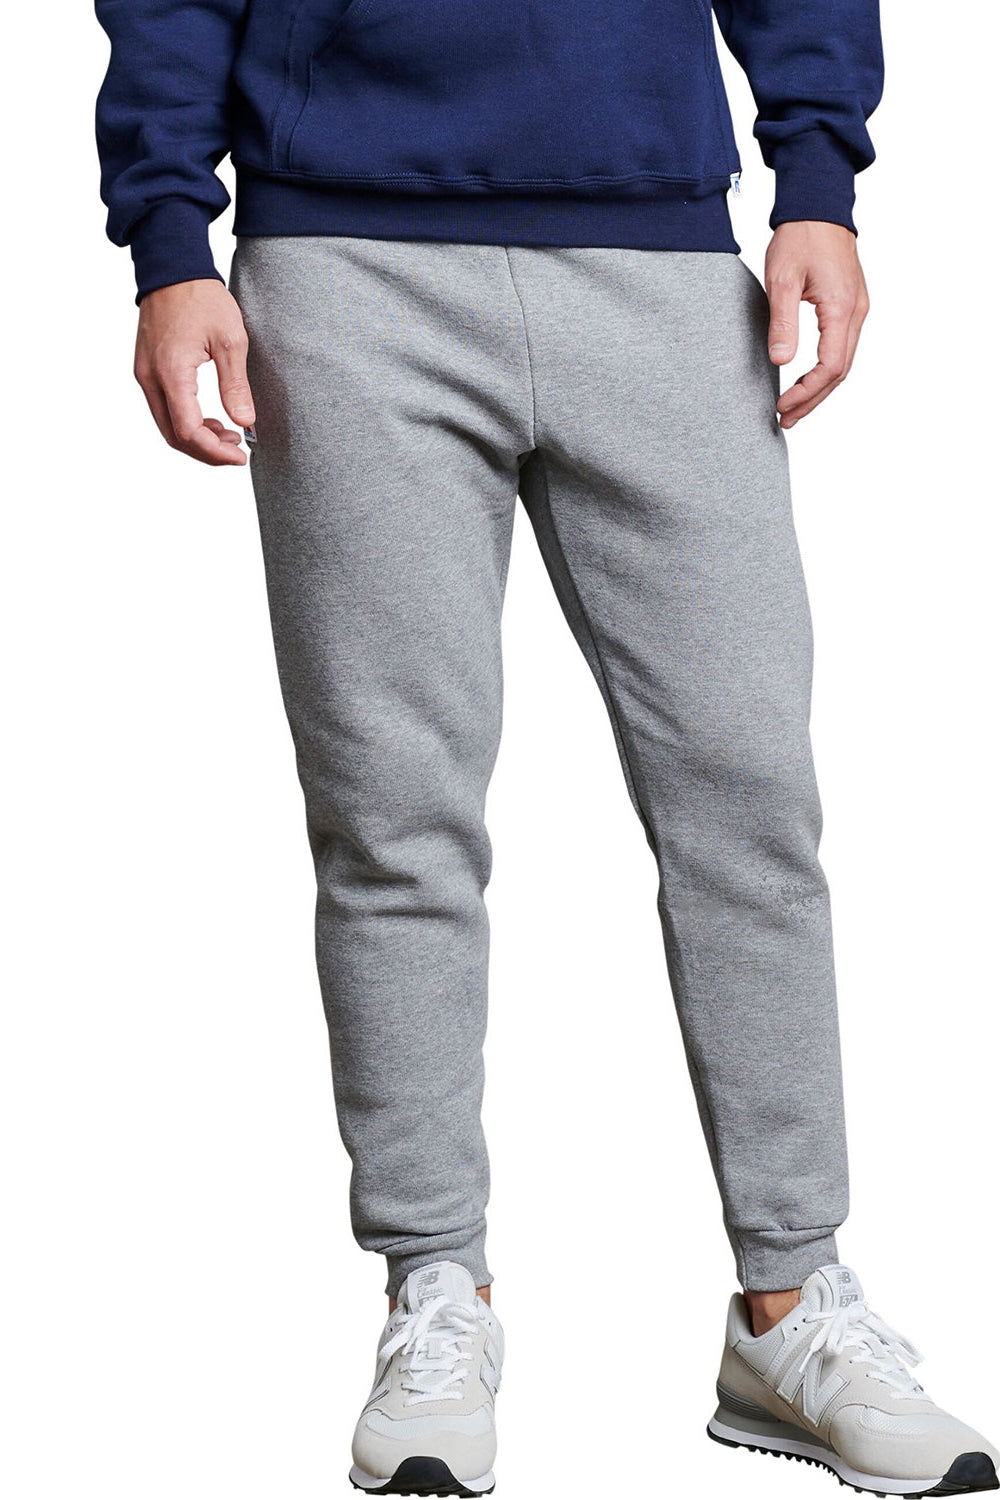 Russell Athletic 20JHBM Mens Dri-Power Jogger Sweatpants w/ Pockets Oxford Grey Front